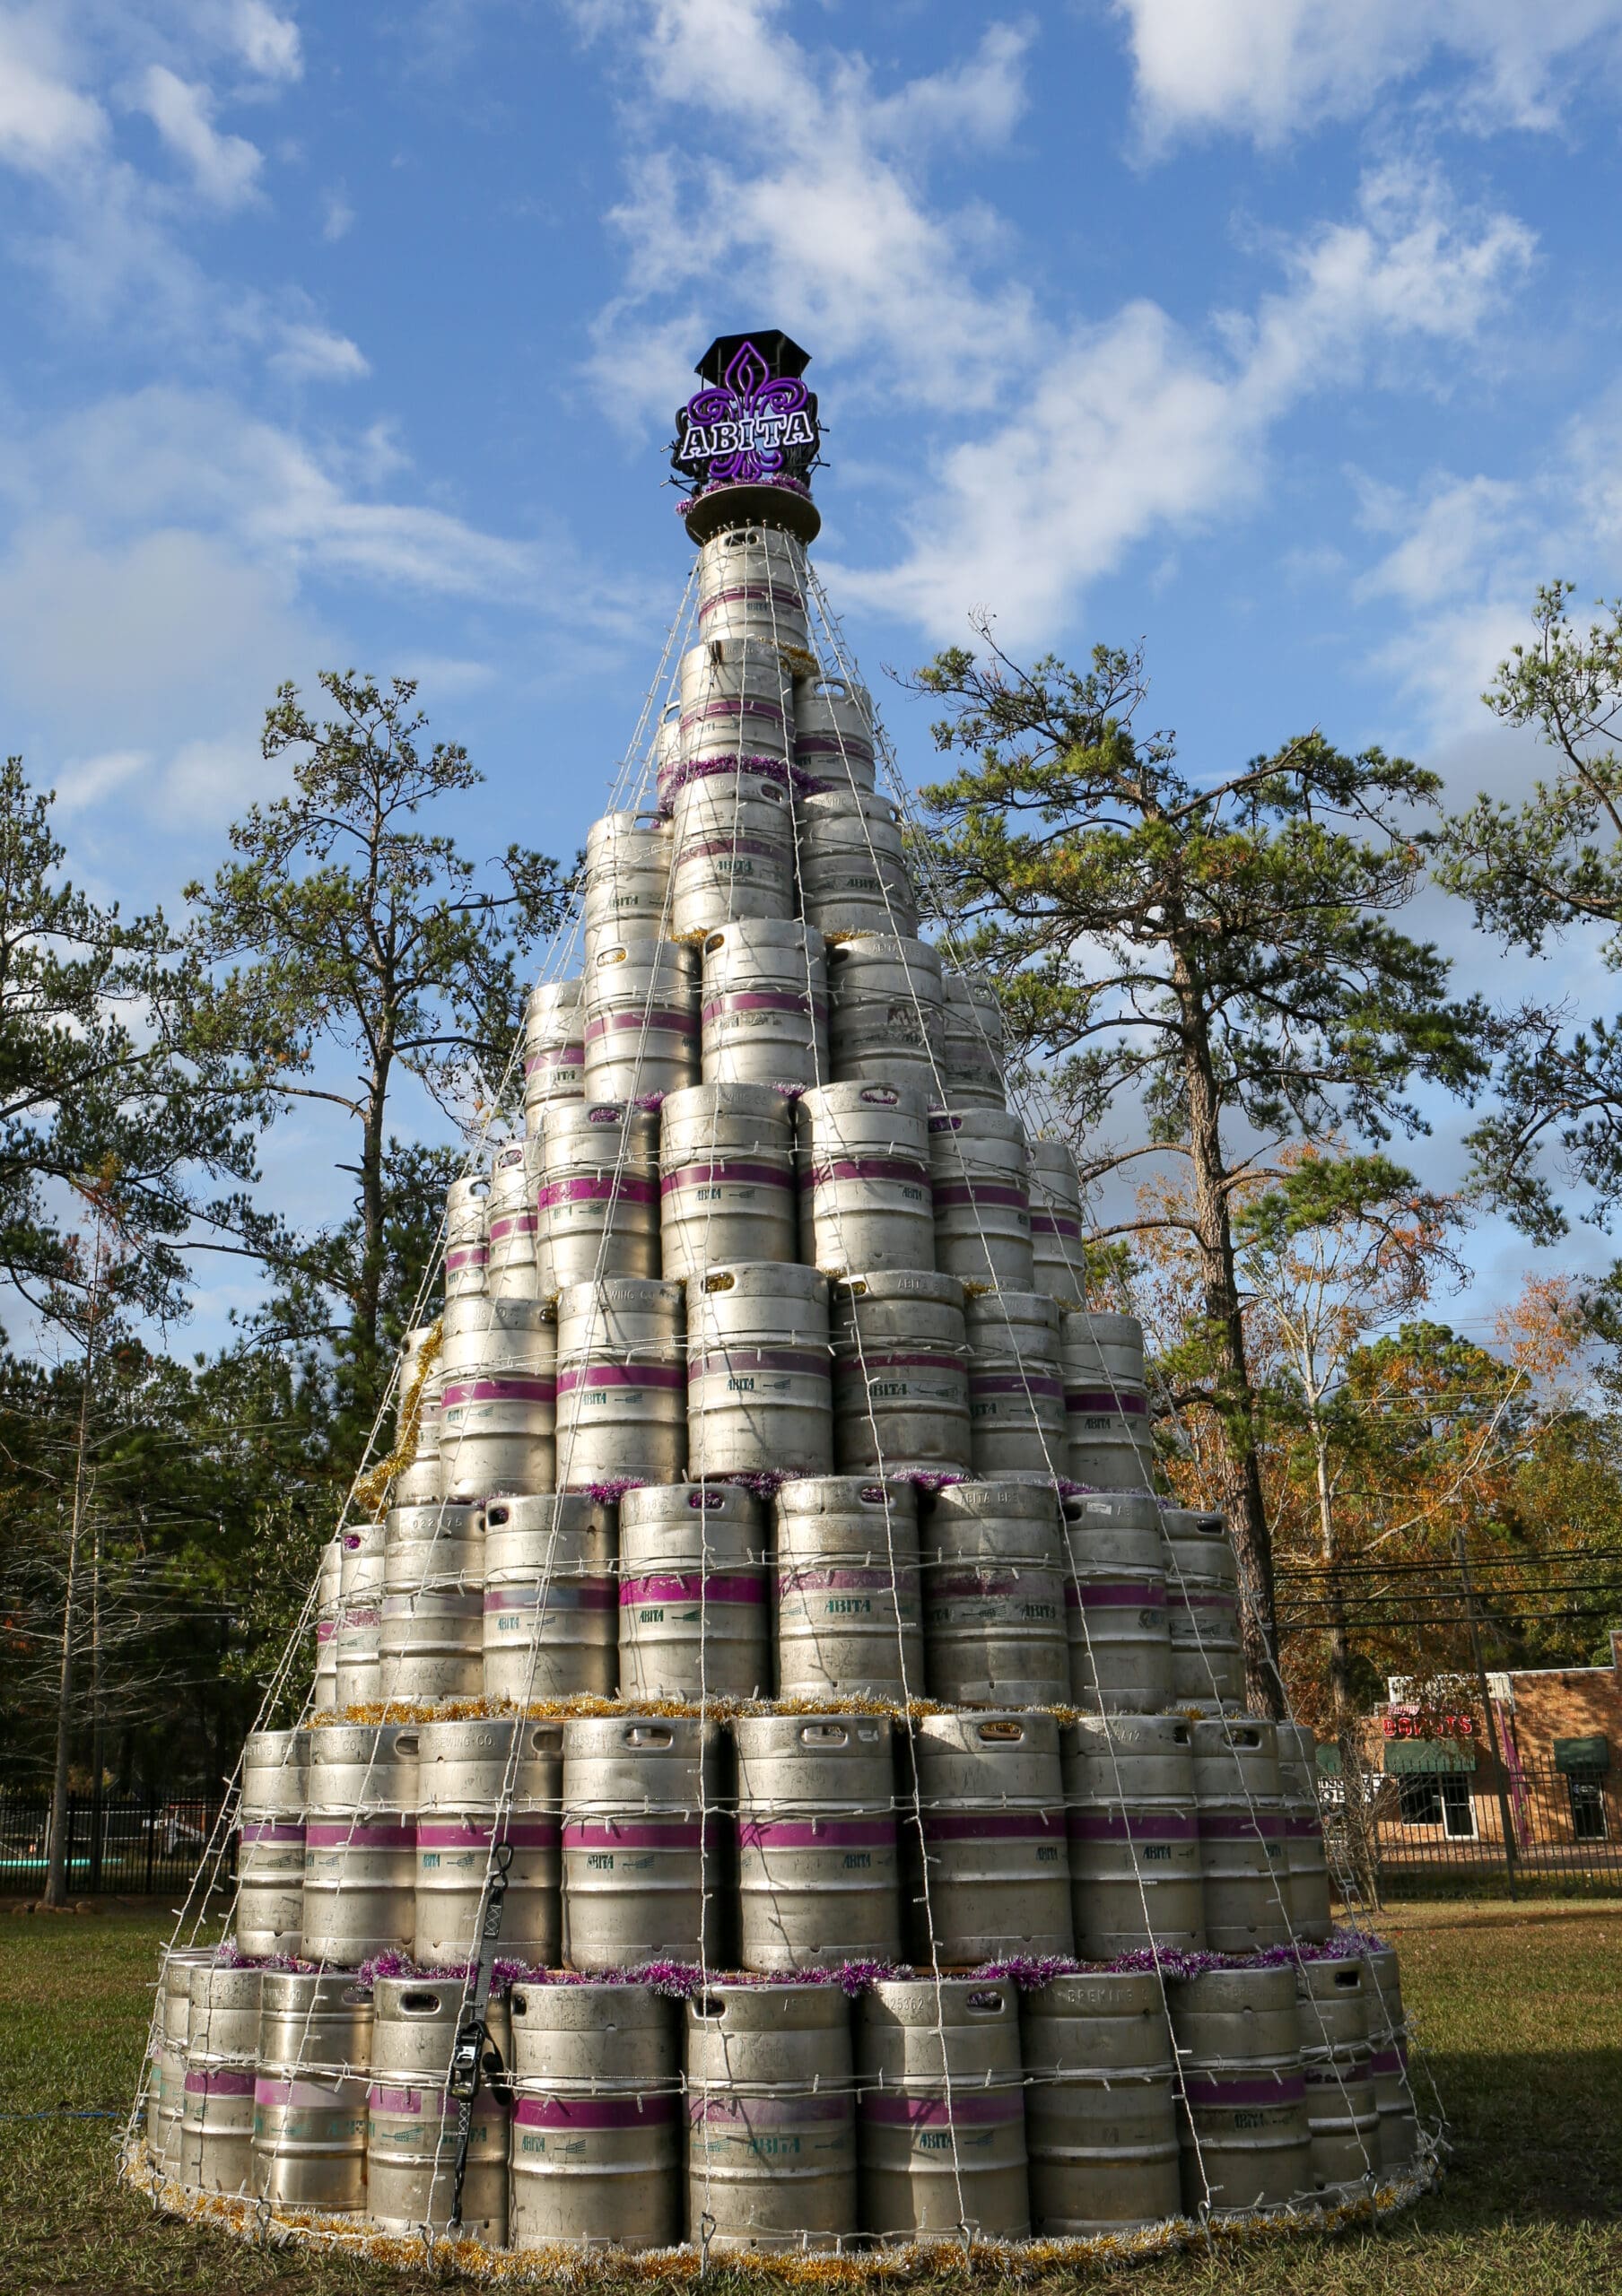 christmas tree made out of abita beer kegs in the beer garden at abita brewery